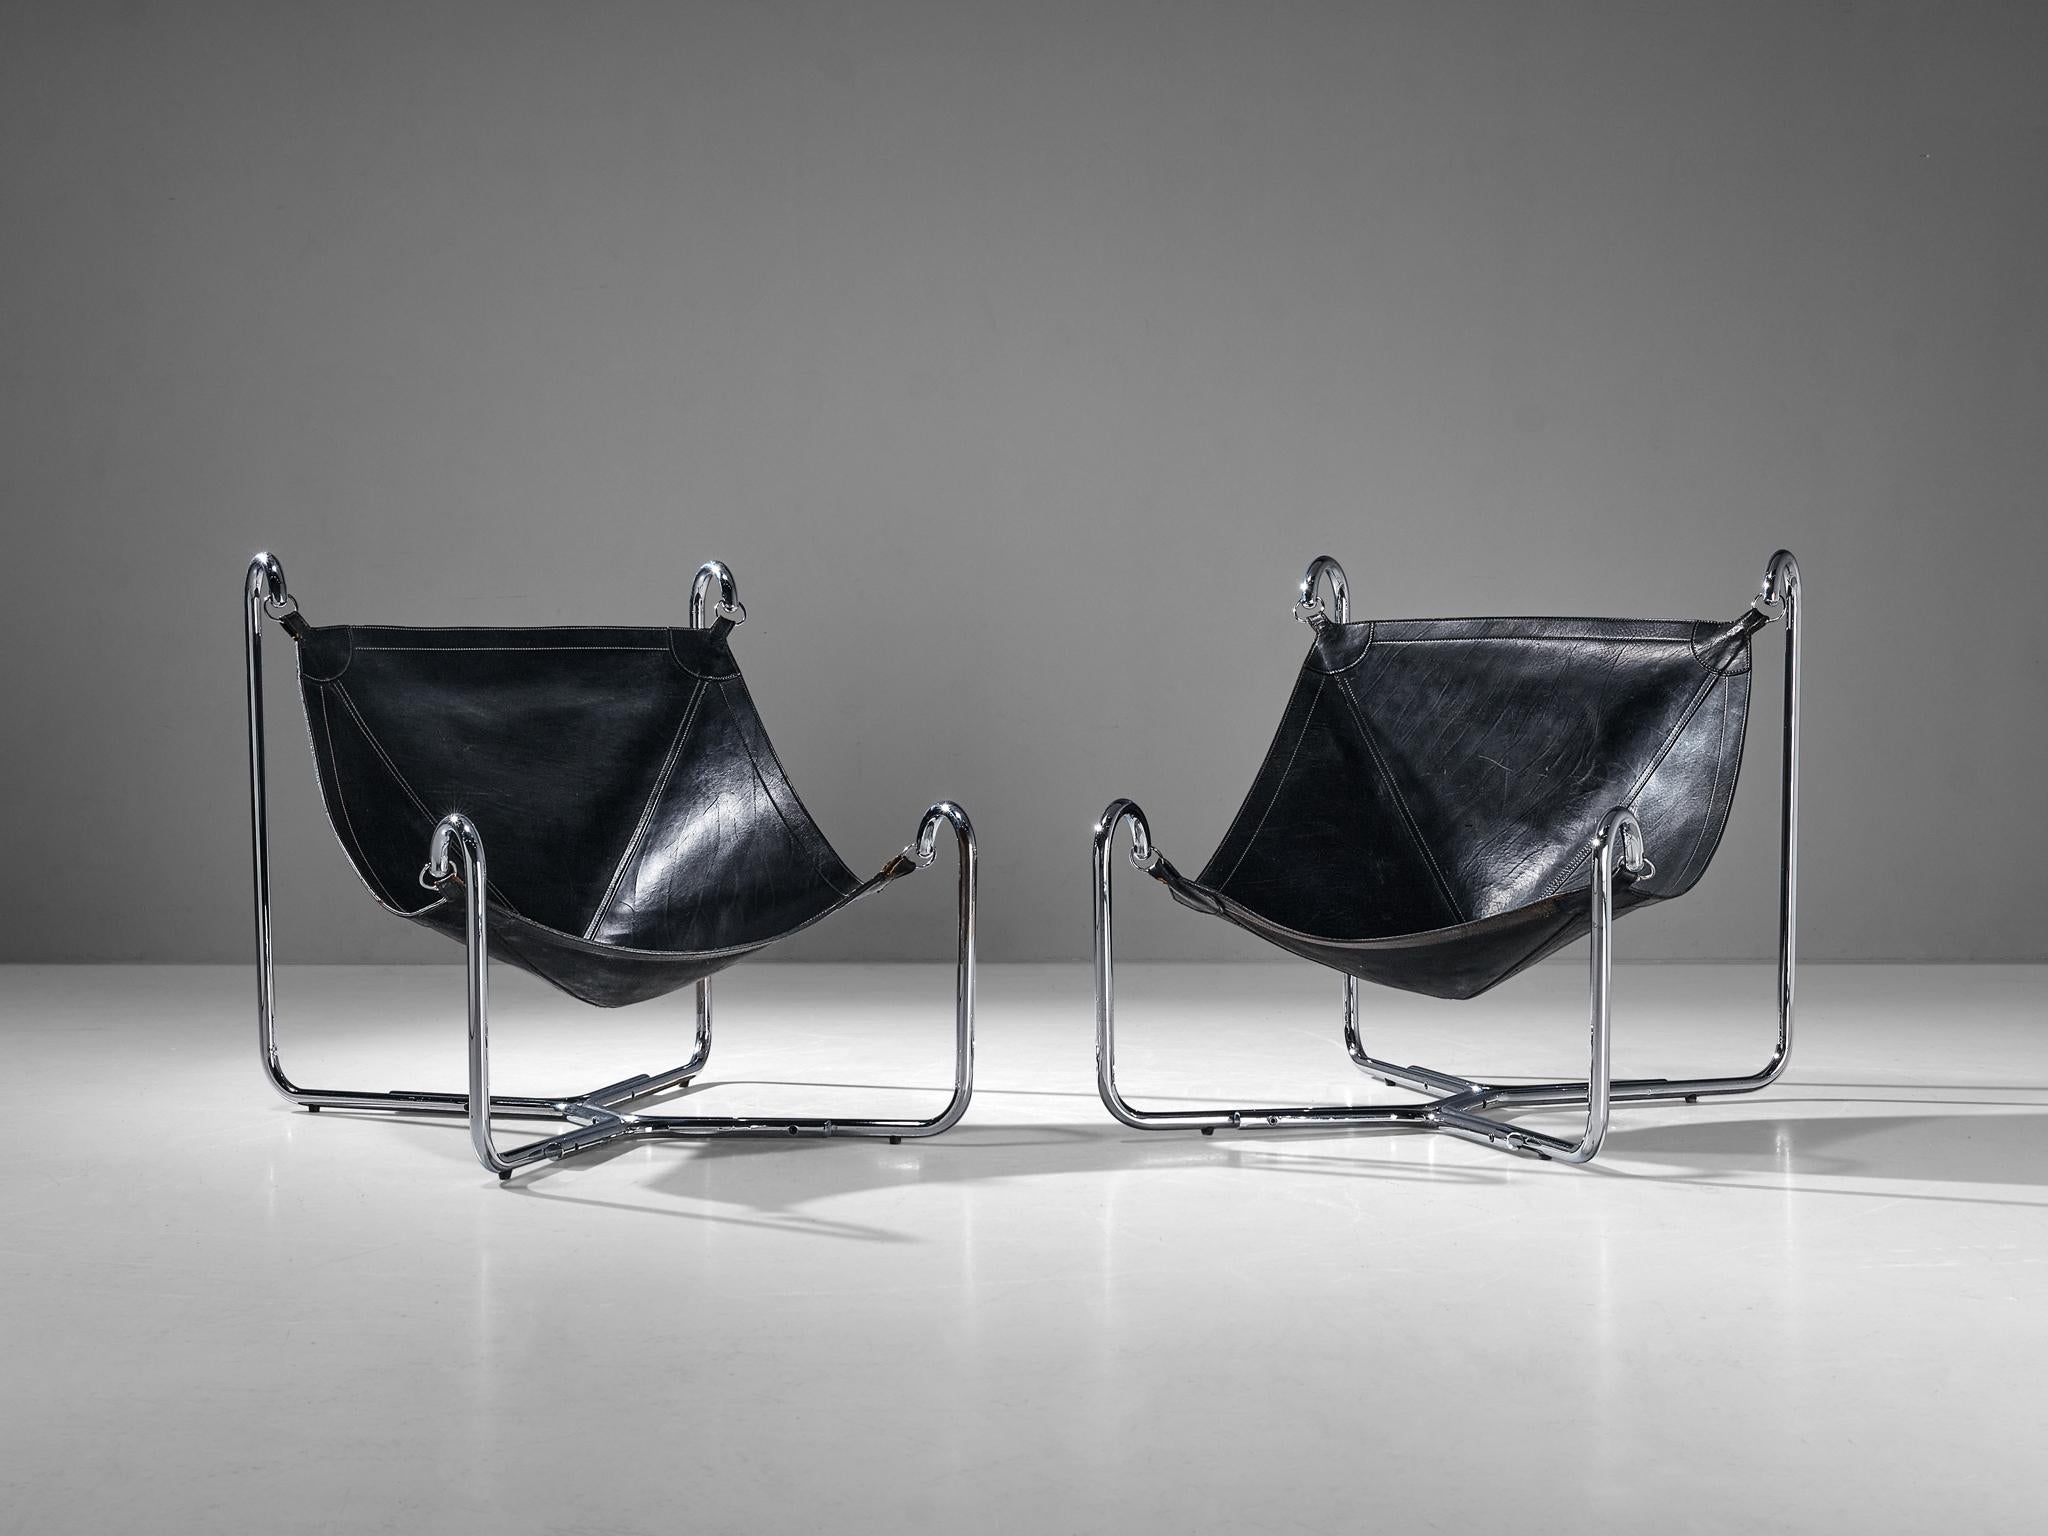 Gianni Pareschi and Ezio Didone for Busnelli, pair of 'Baffo' lounge chairs, chromed metal, leather, Italy, design 1969

These 'Baffo' lounge chairs by Italian duo Gianni Pareschi and Ezio Didone are designed in 1969, and produced by Busnelli. They